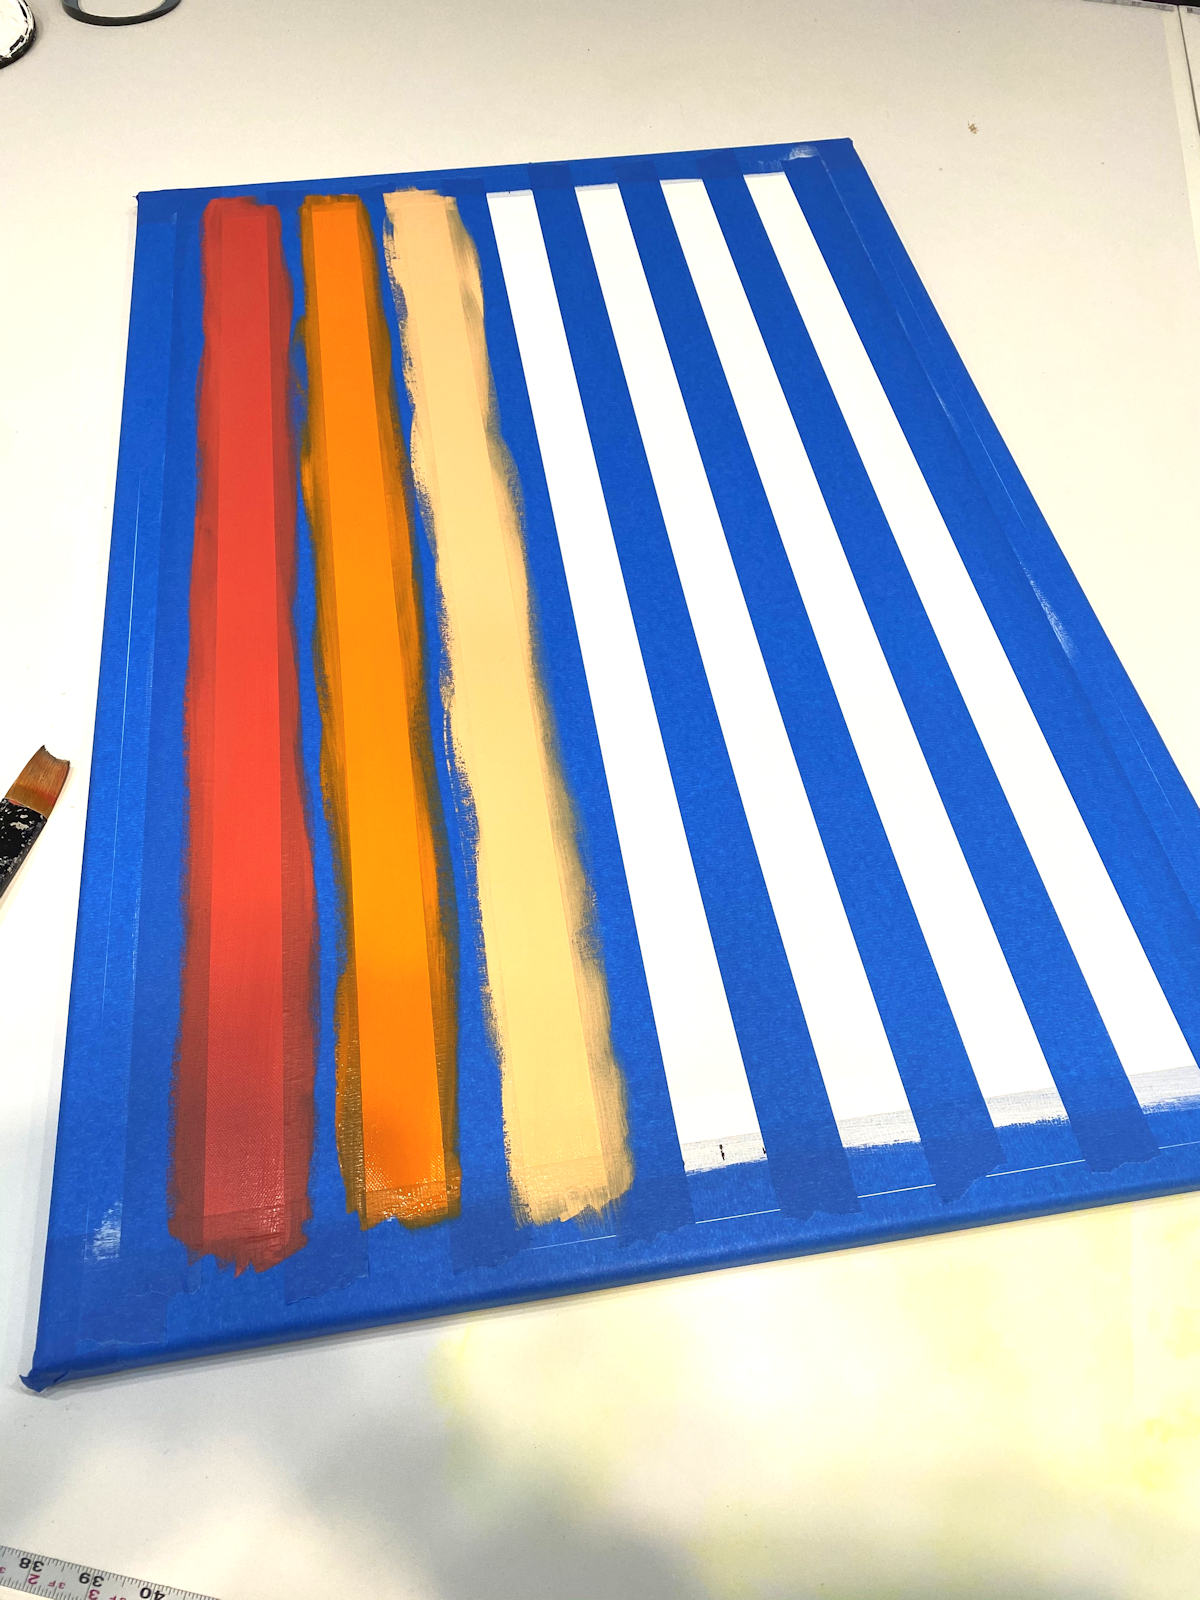 DIY colorful cut glass glitter artwork - step 3 - tape off and paint colorful stripes